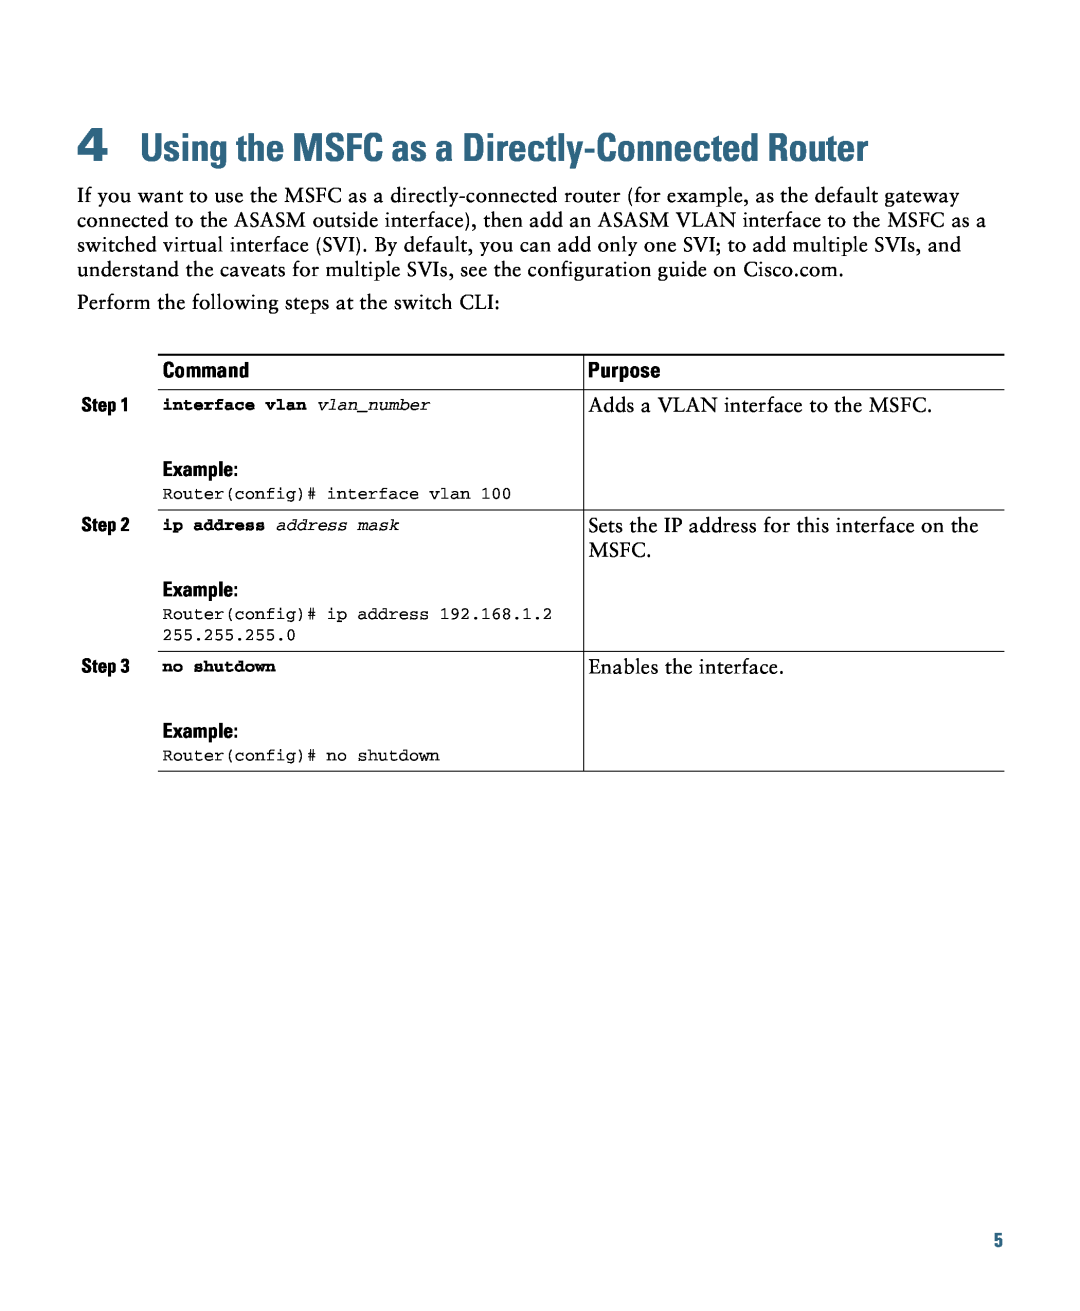 Cisco Systems ASASSMCSC10K9 quick start Using the MSFC as a Directly-Connected Router, Command, Purpose, Example 